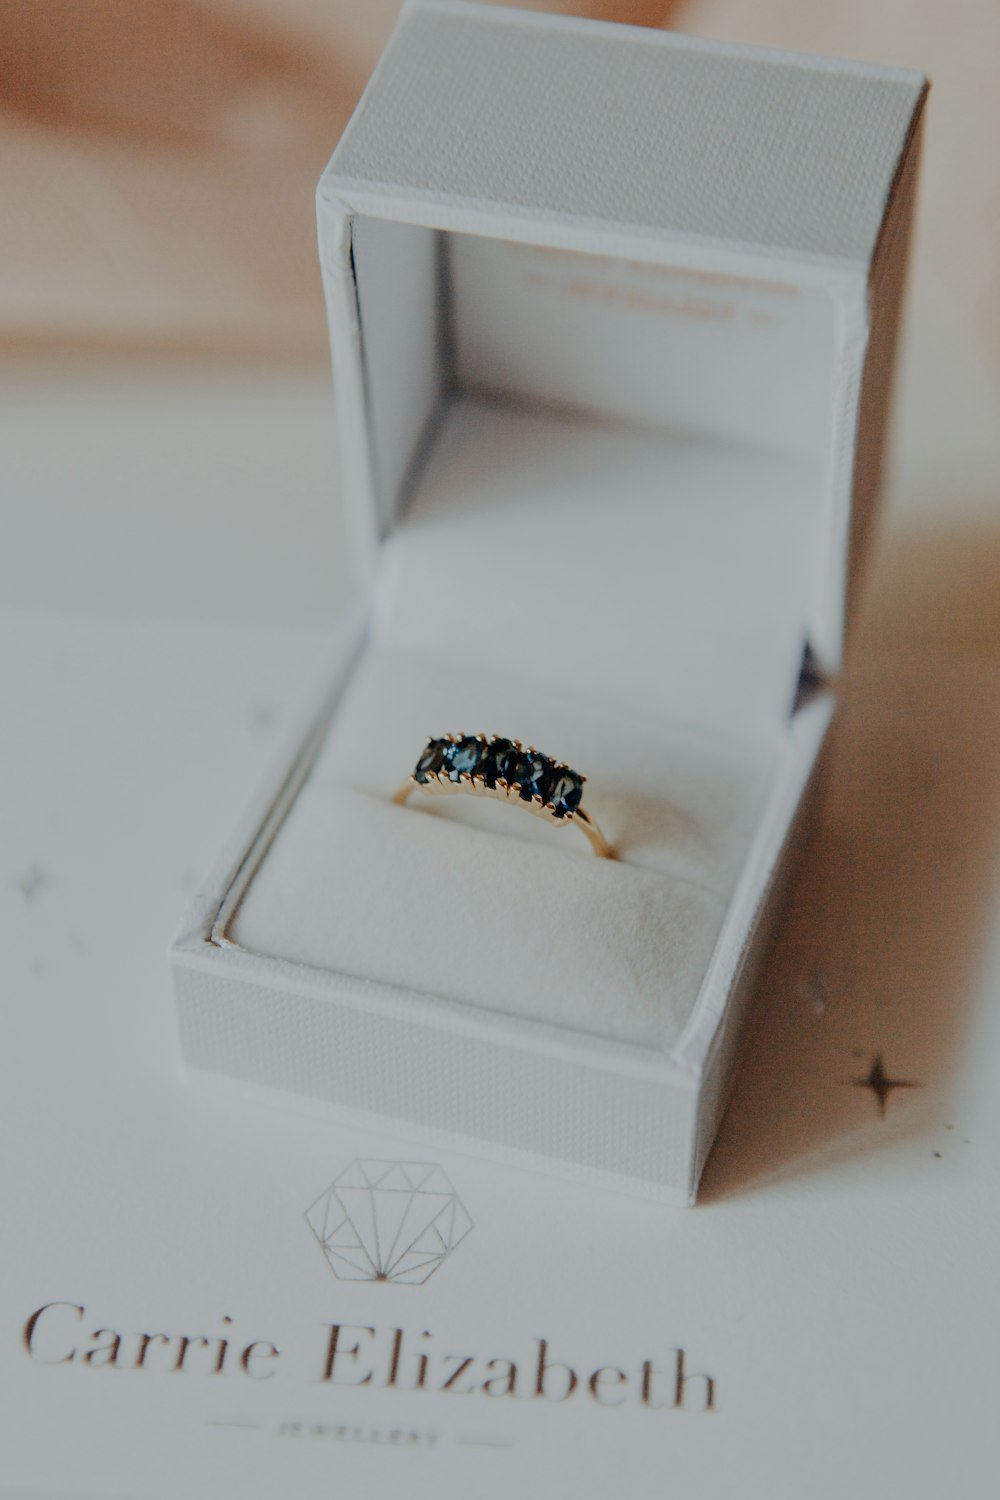 a ring in a box on a table